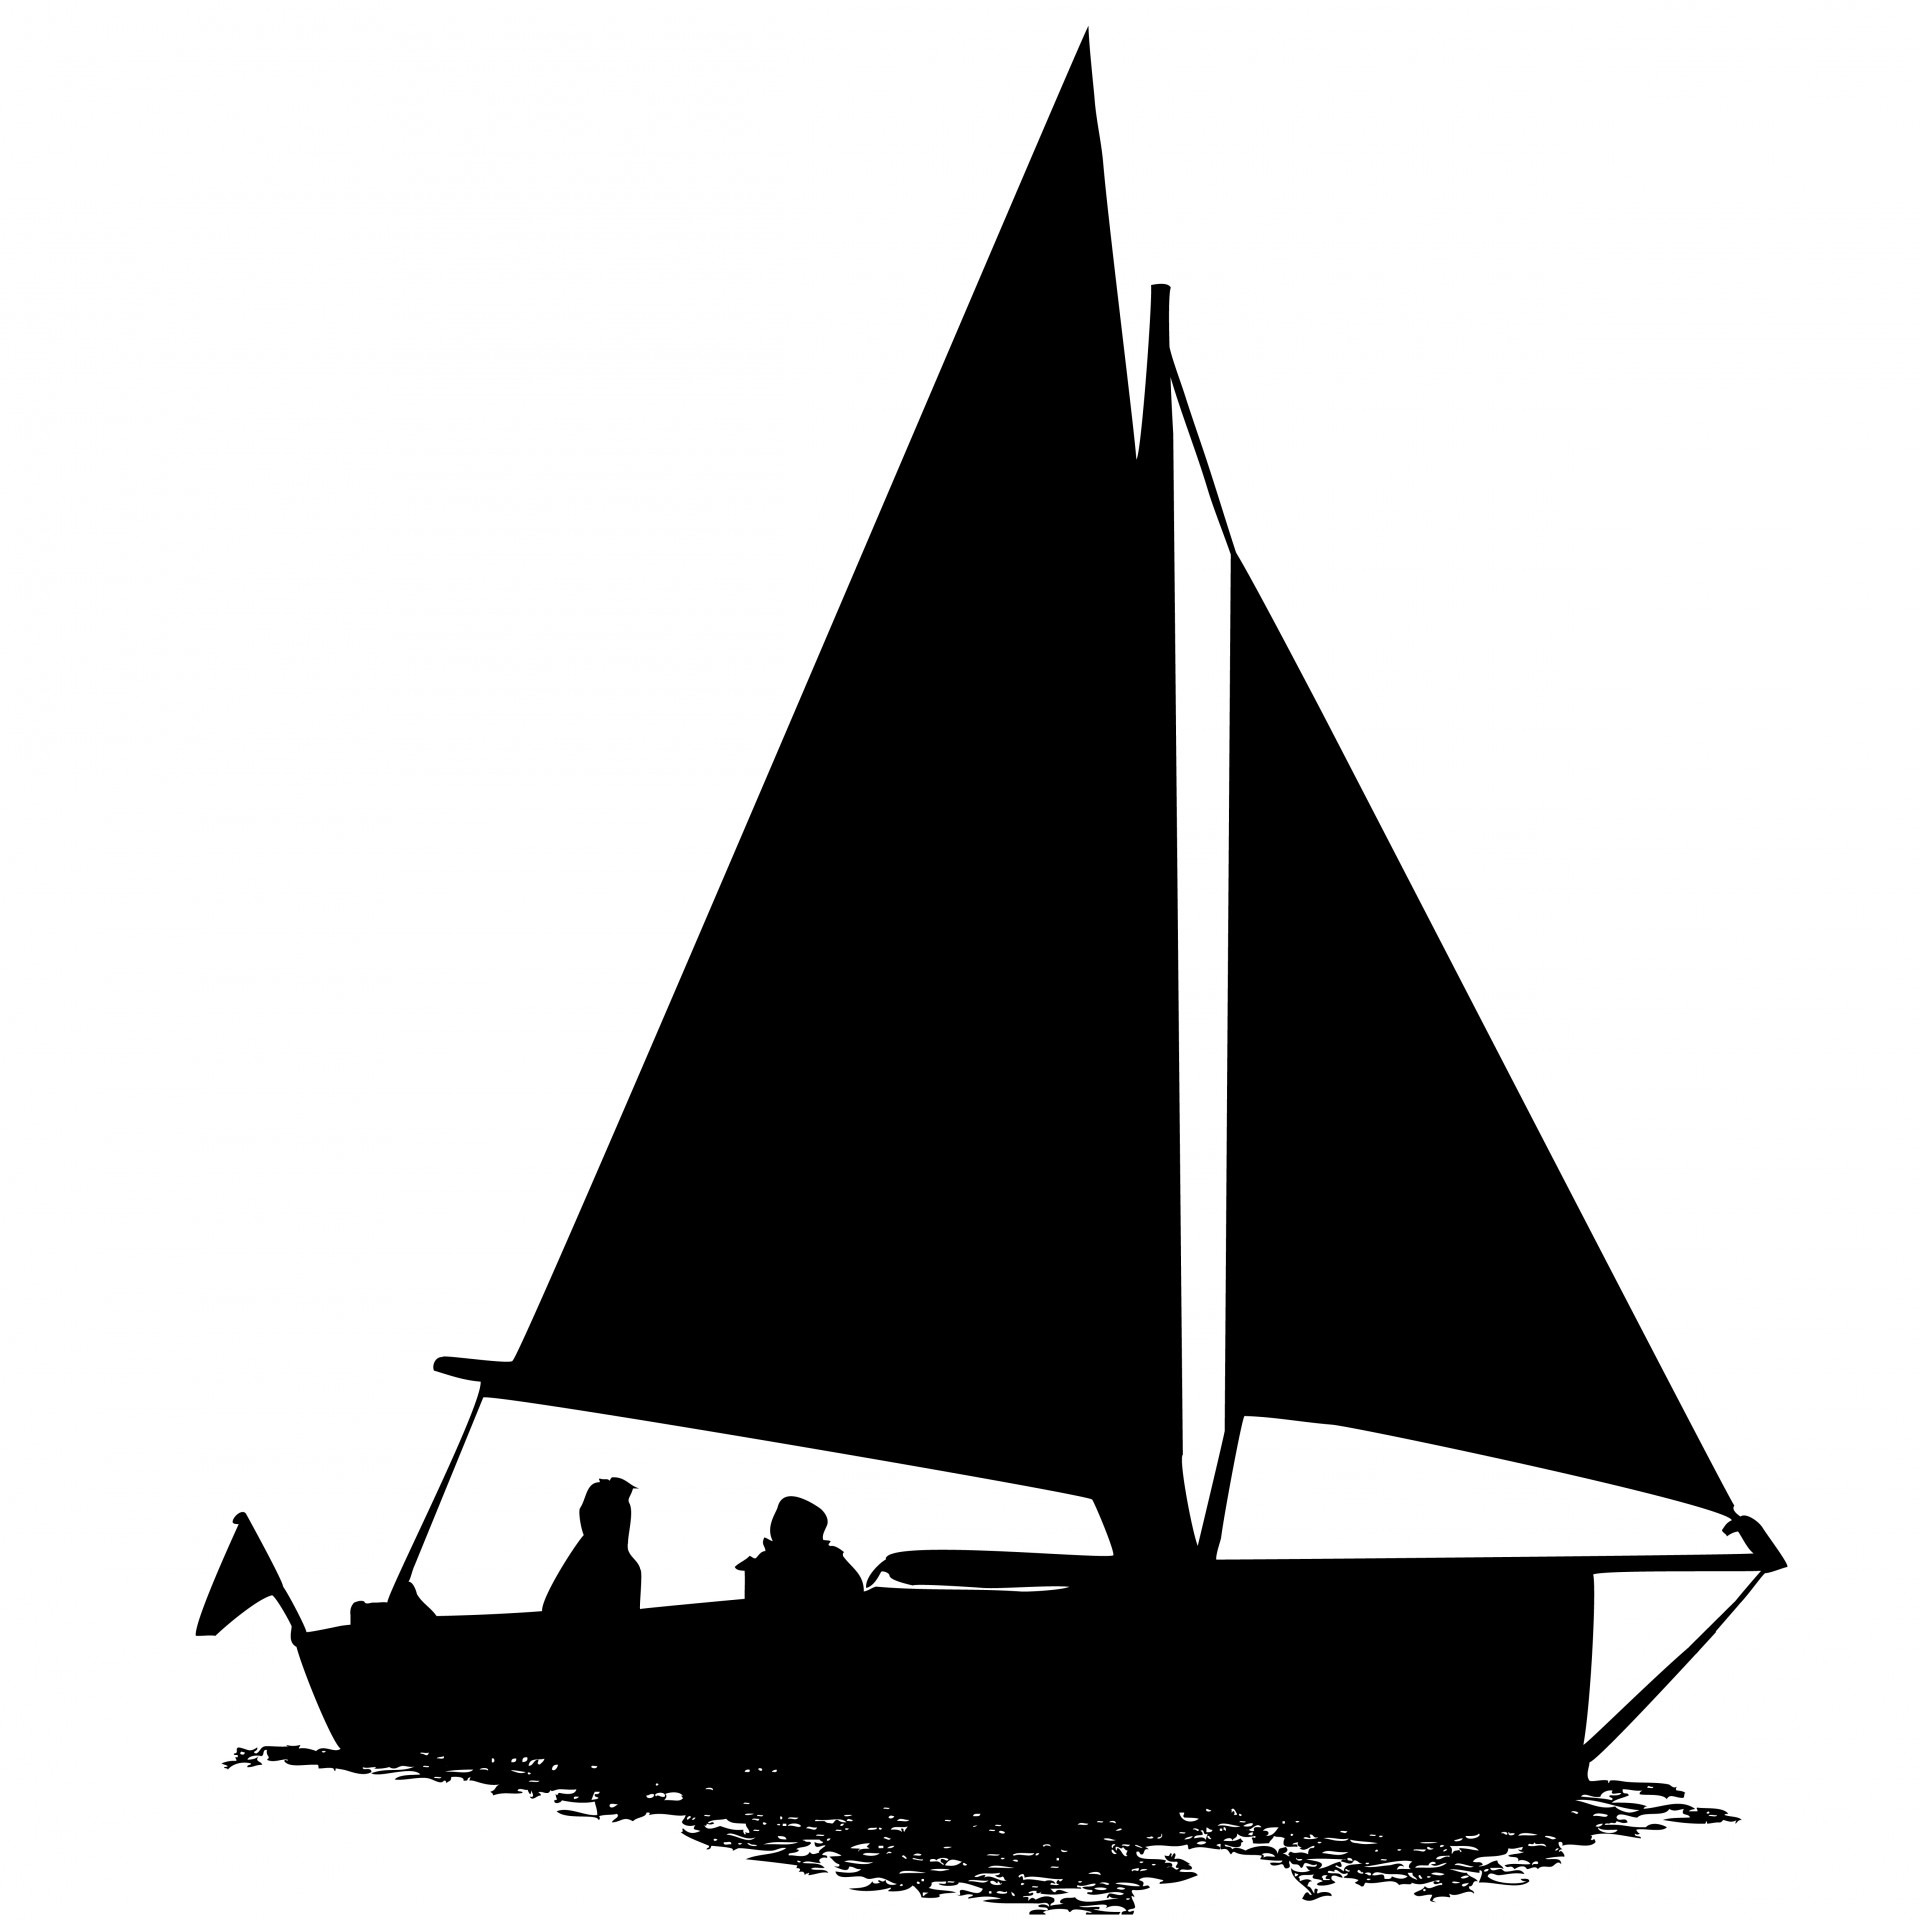 Sailing boat silhouette free image download